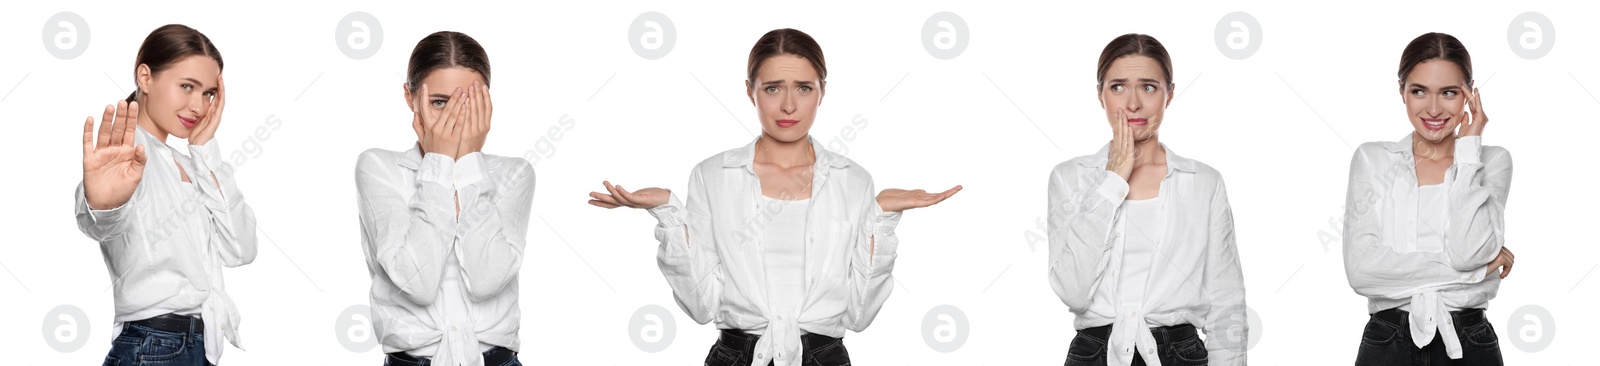 Image of Embarrassed woman on white background, set with photos